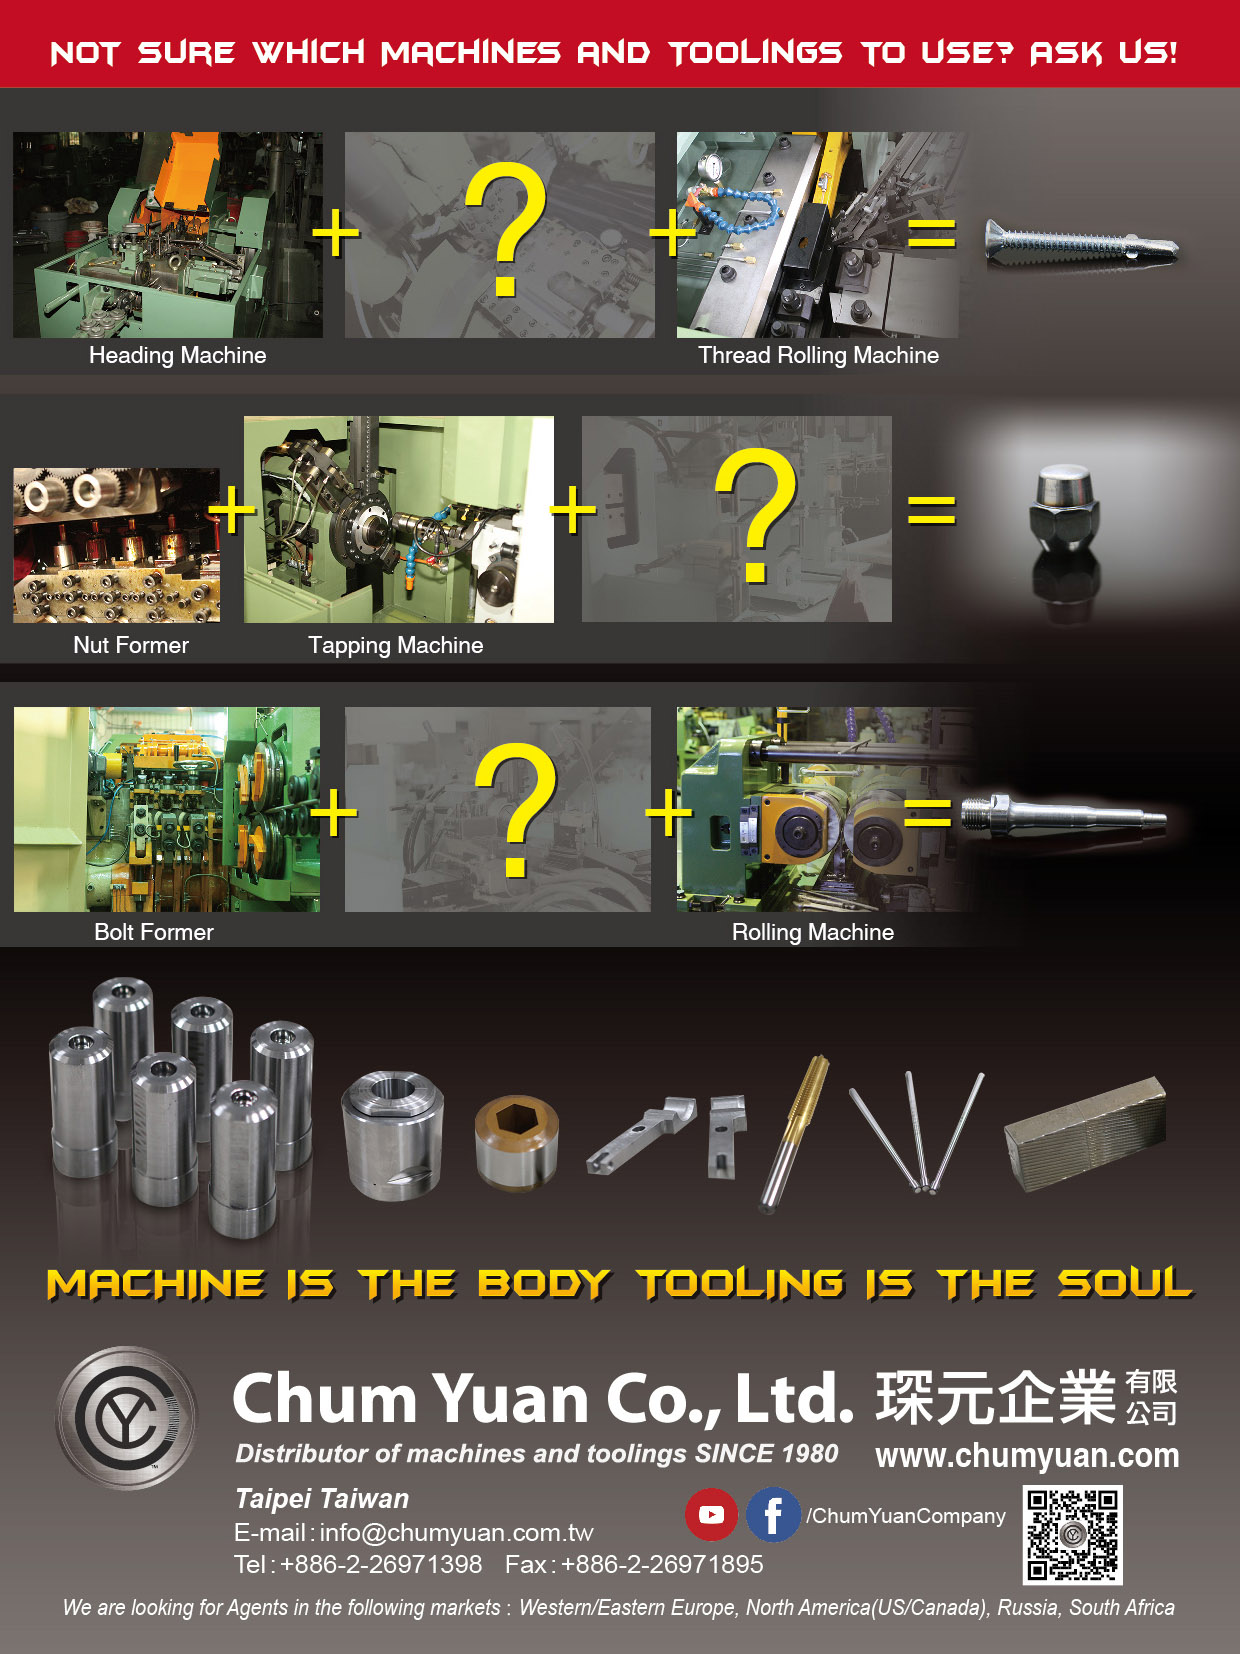  Distributor of machines and tooling